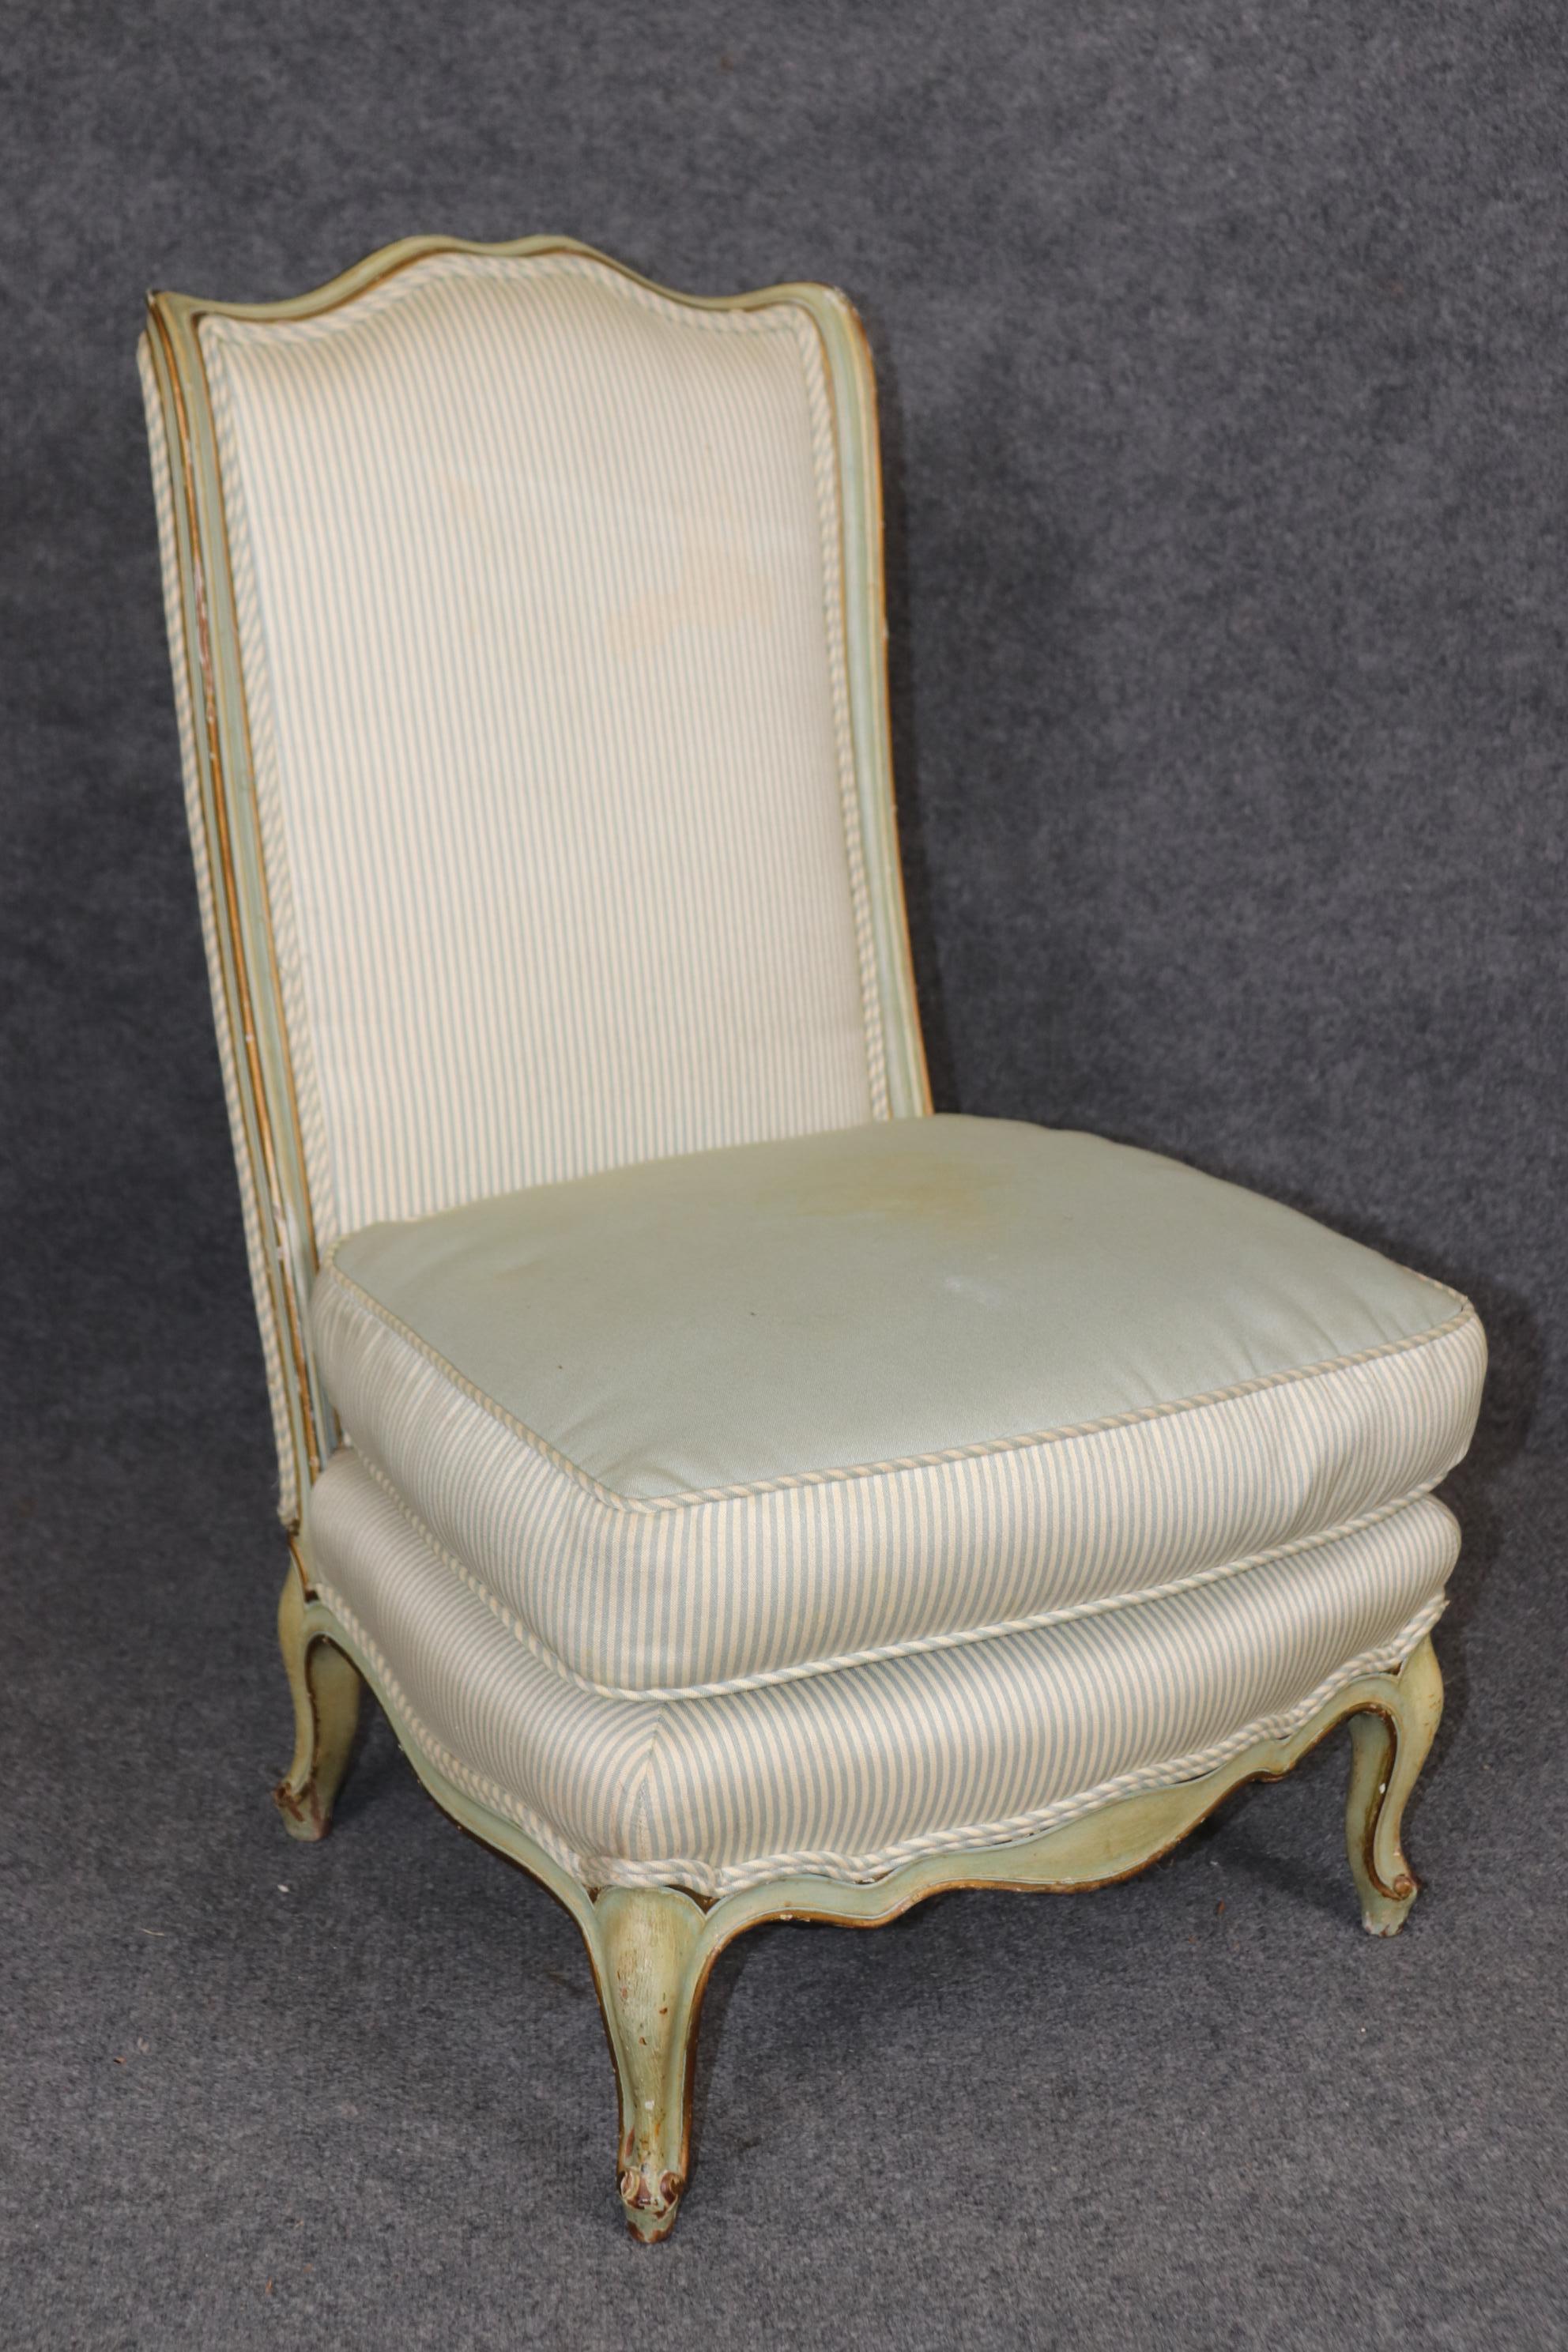 This is a rare pair of boudoir or slipper chairs. The chairs are in their original robins egg blue-green finish and has signs of age and distressing and the upholstery is entirely original with stains and signs of age and use. Measures 33 tall x 20